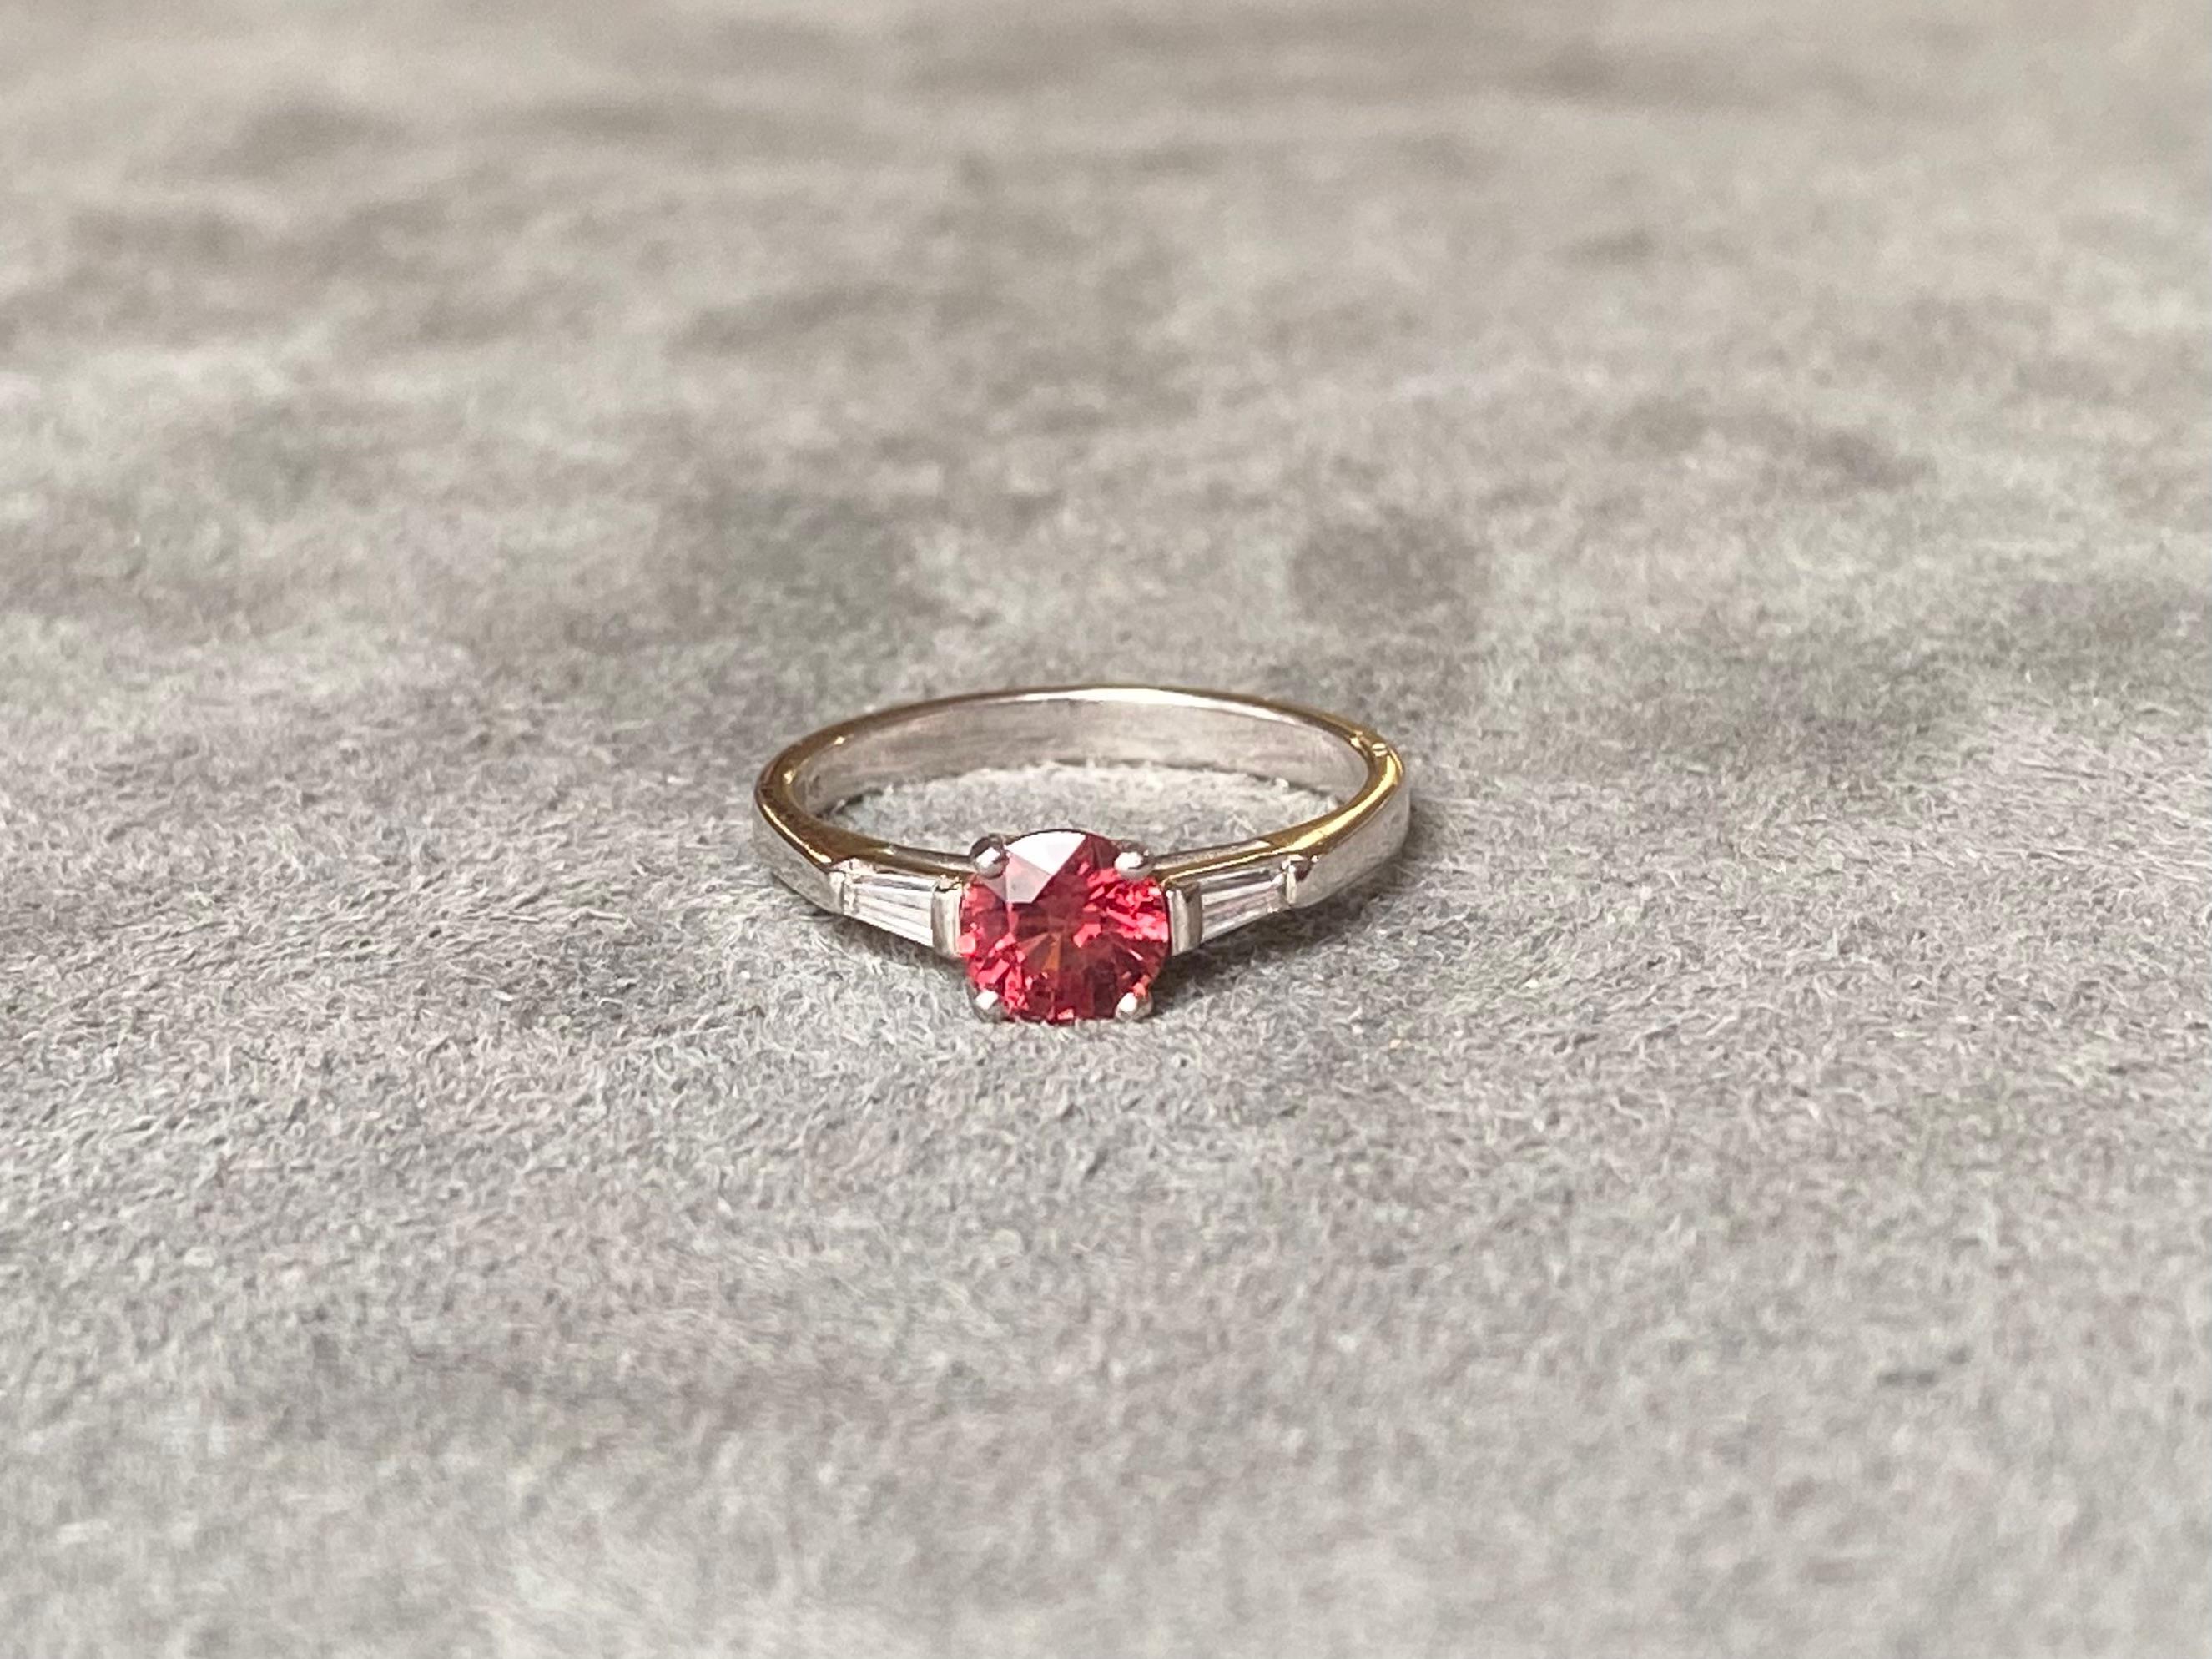 A orangy-red spinel of approximately 0.60ct set with two tapered diamonds (approximately 0.25ct total G VS) in 18k white gold. 